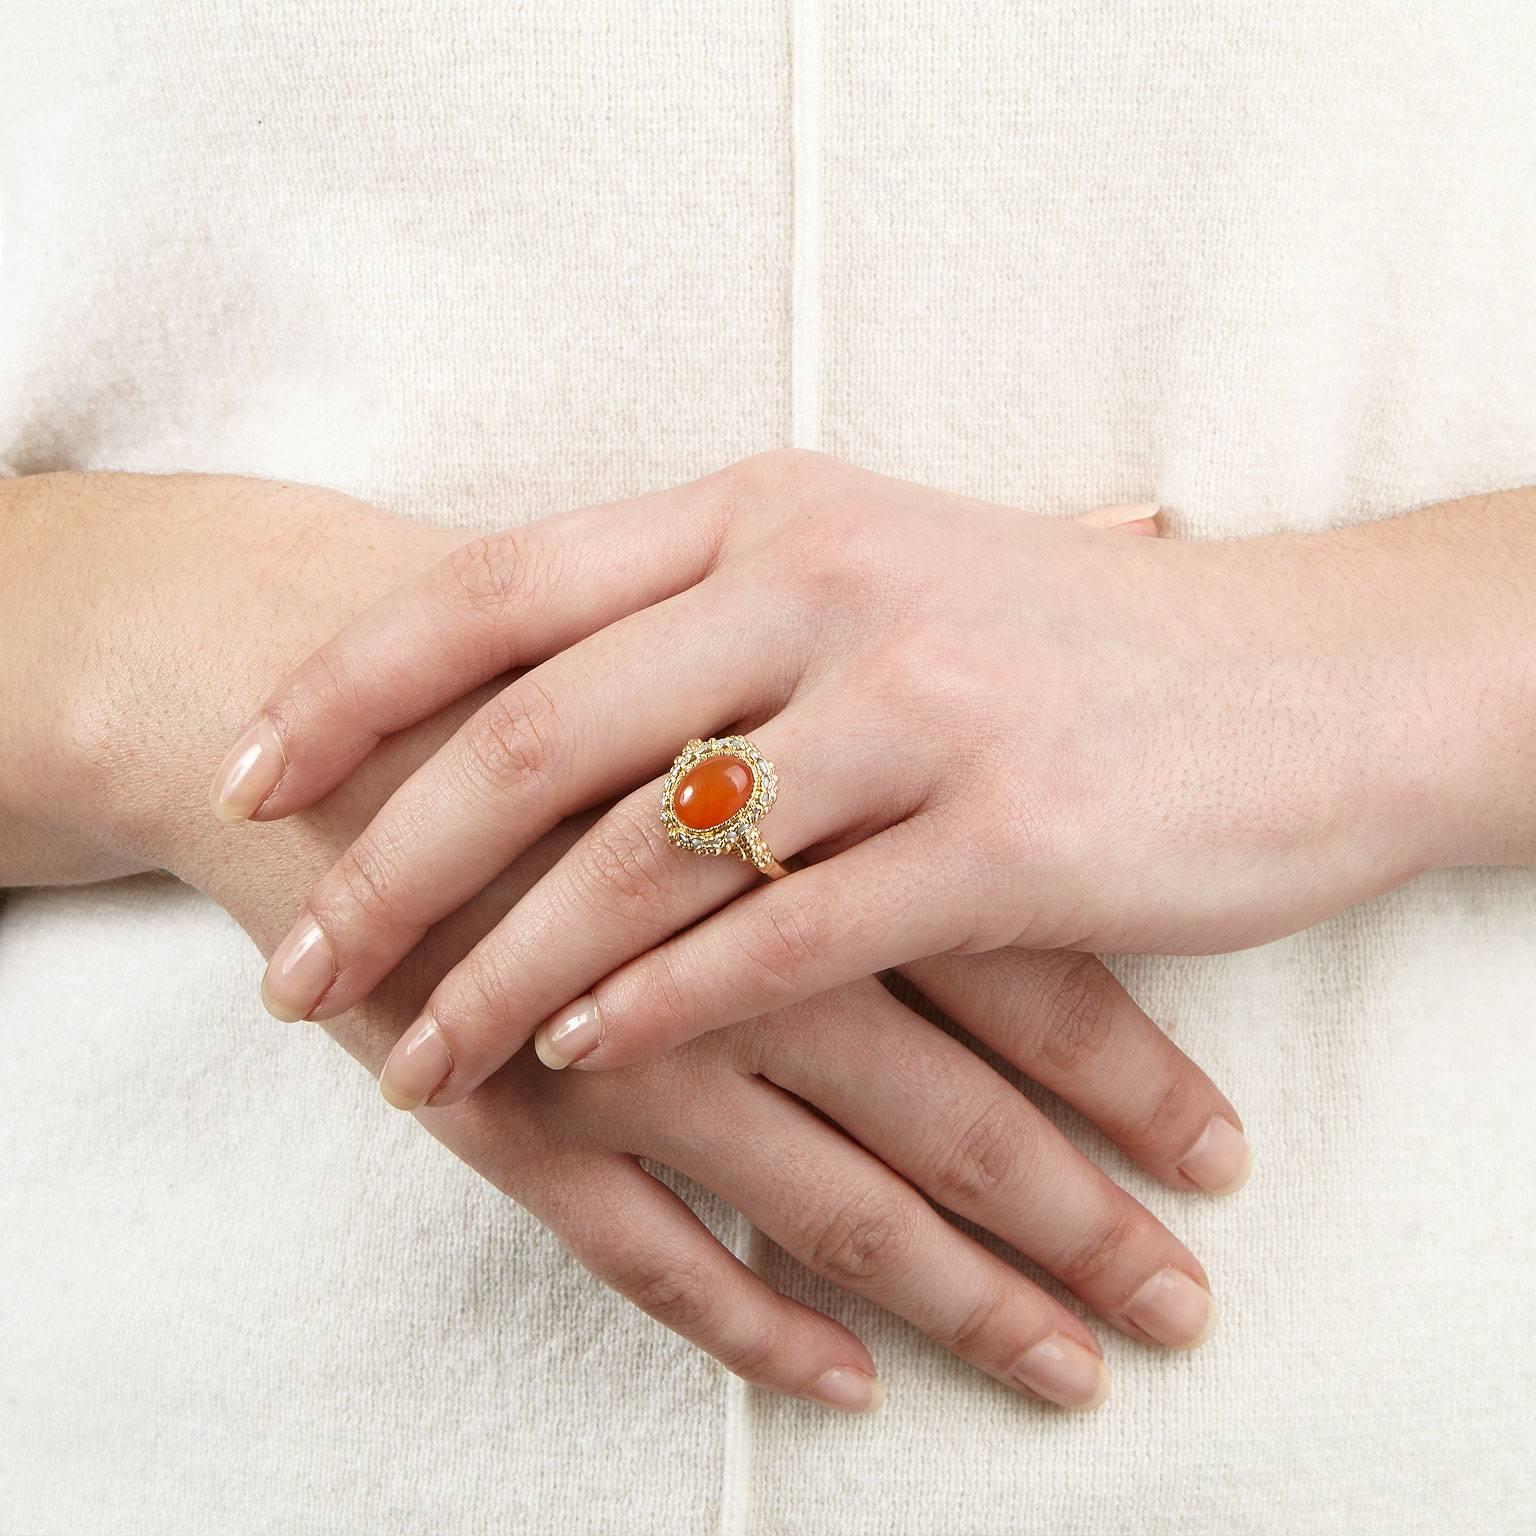 The beautiful La Belle ring features a vibrant orange carnelian stone at its centre, surrounded by a halo of seed pearls. All encrusted in rose gold plated silver atop a hammered band. 

Ring size: UK L / US 5.75 / EU 11.25
Stone measures: 12 x